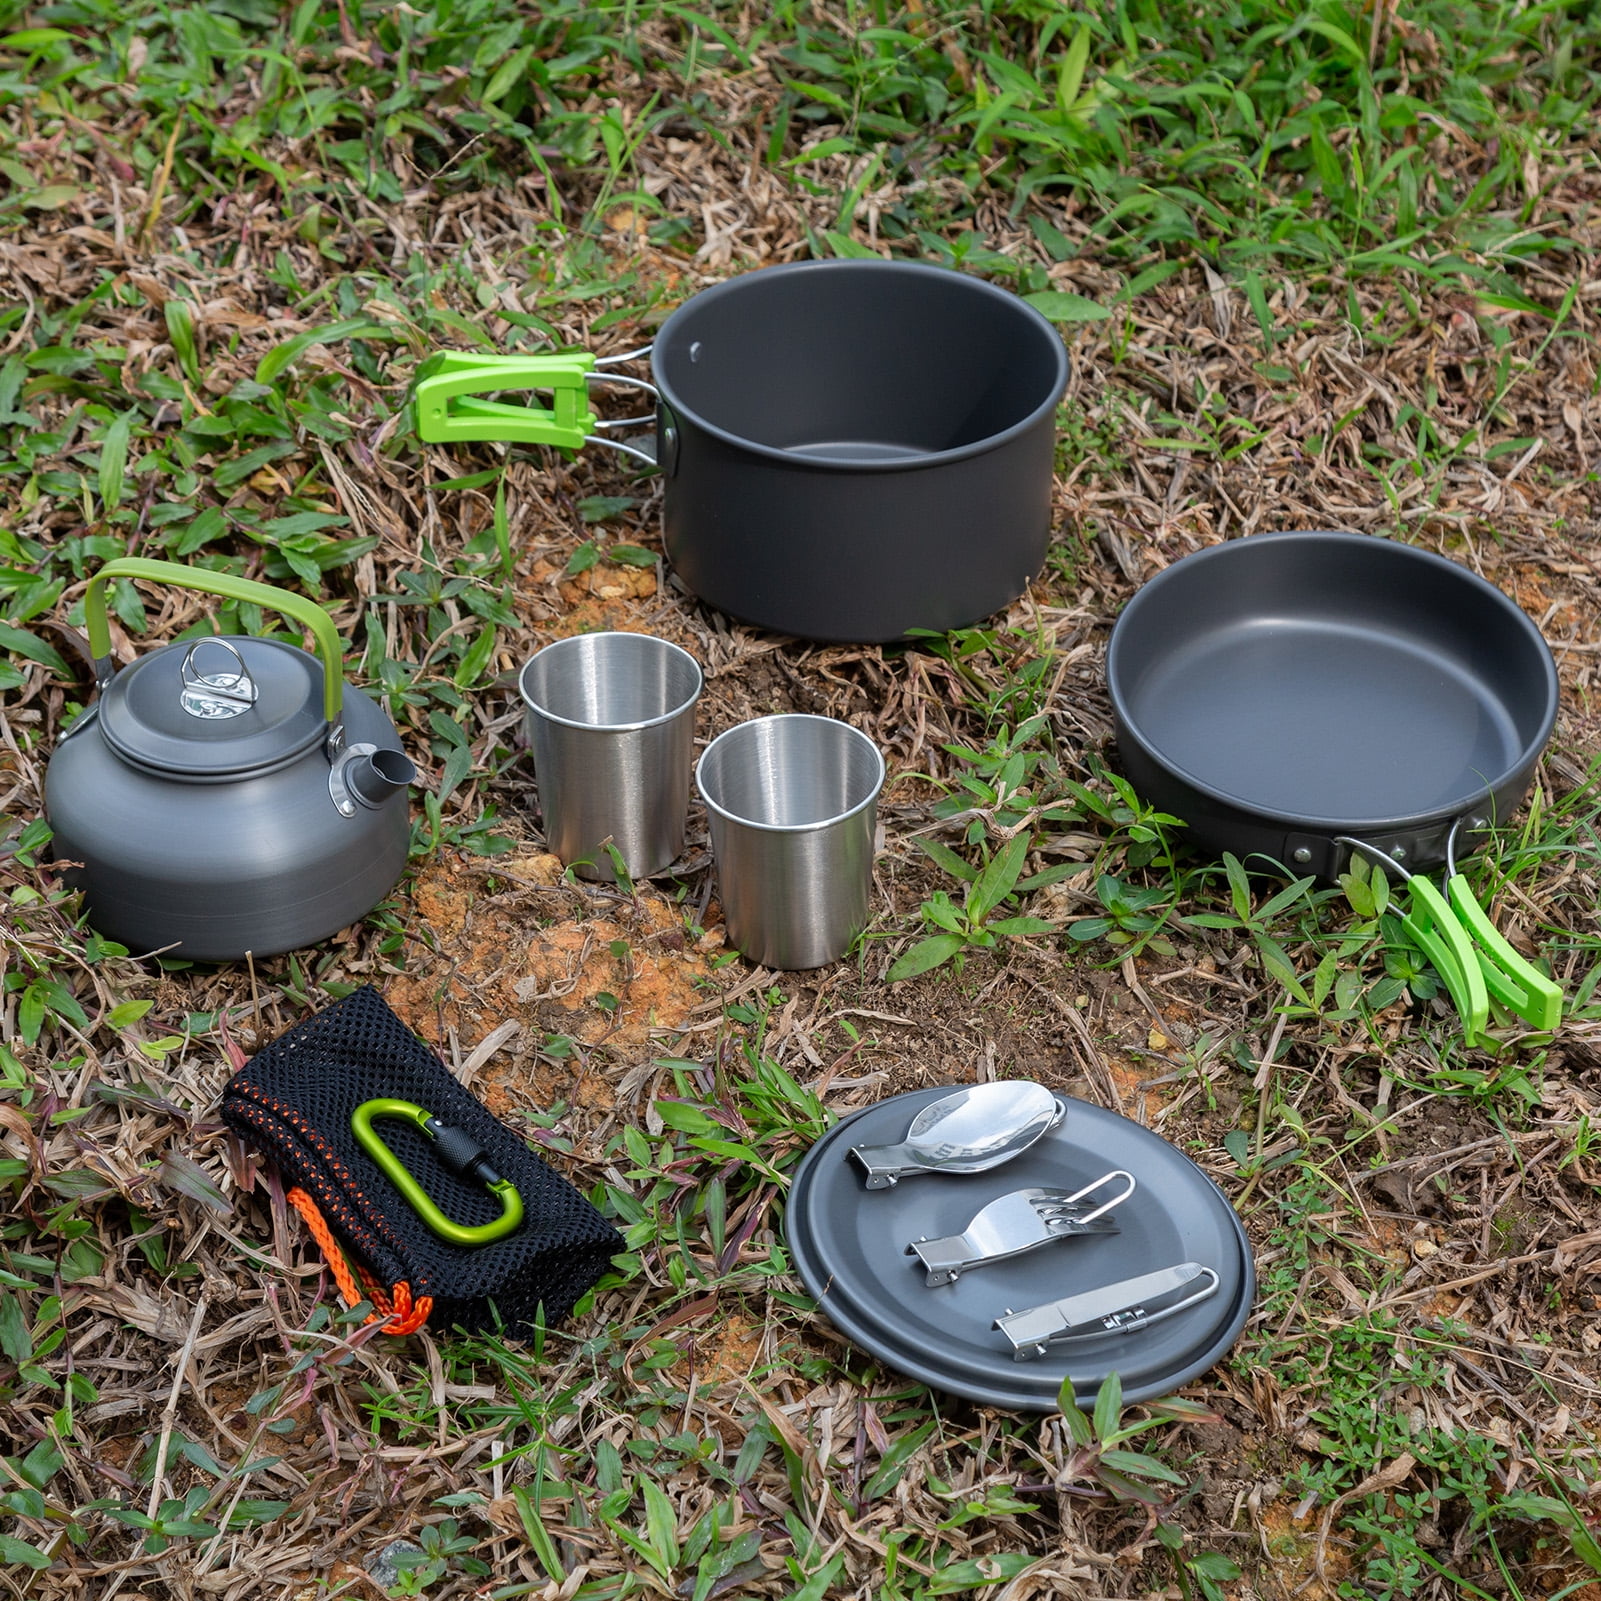 16Pcs Camping Cookware Set with Kettle Pan Pot Spoon Cups Hiking Picnic 